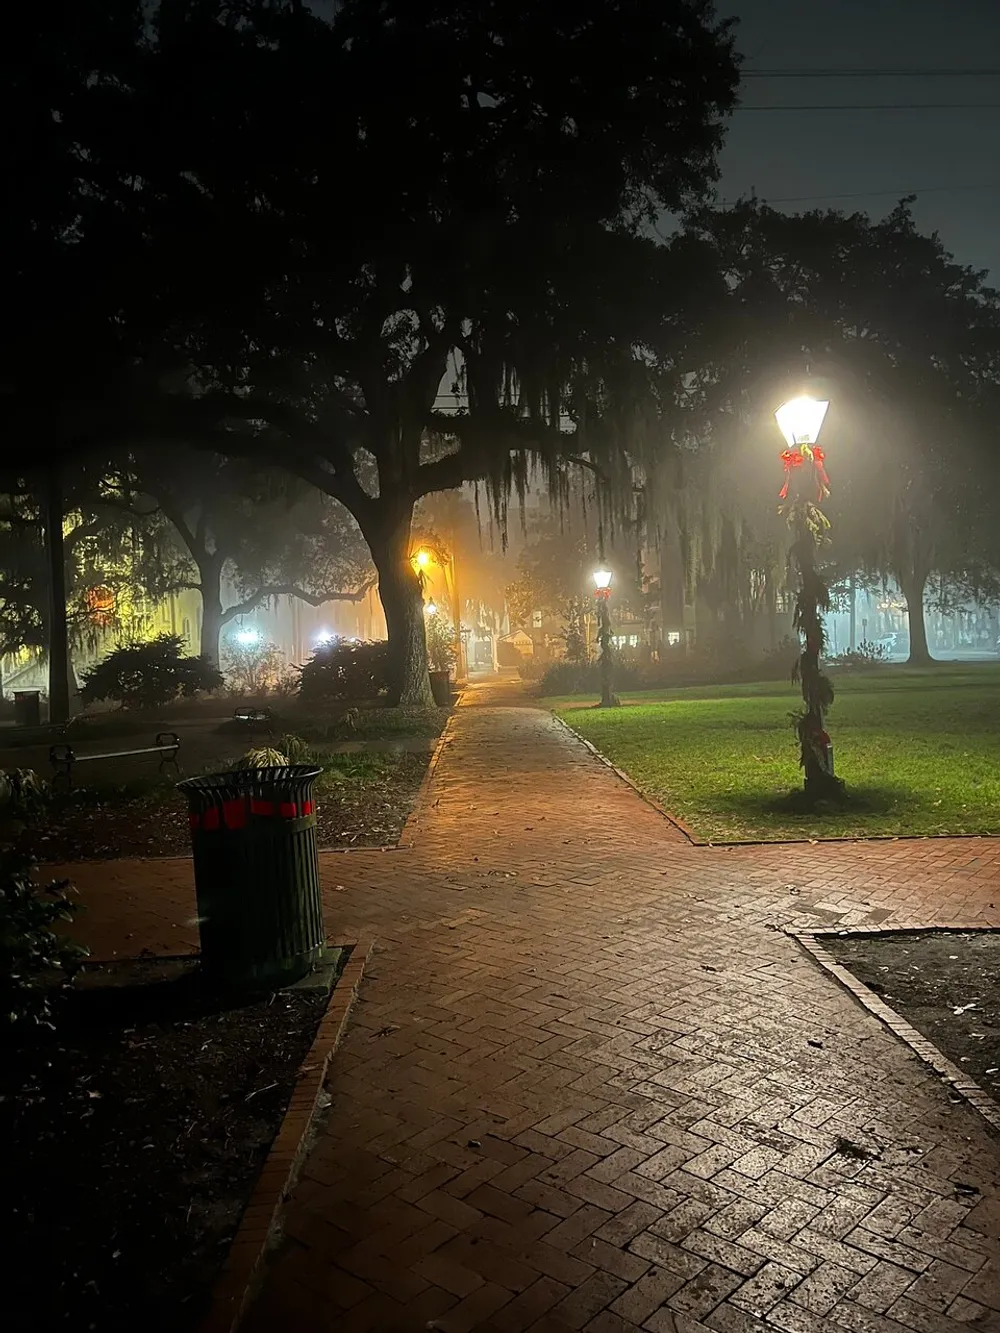 A foggy evening view of a park path lined with old-fashioned lampposts adorned with red bows evoking a quiet serene ambiance